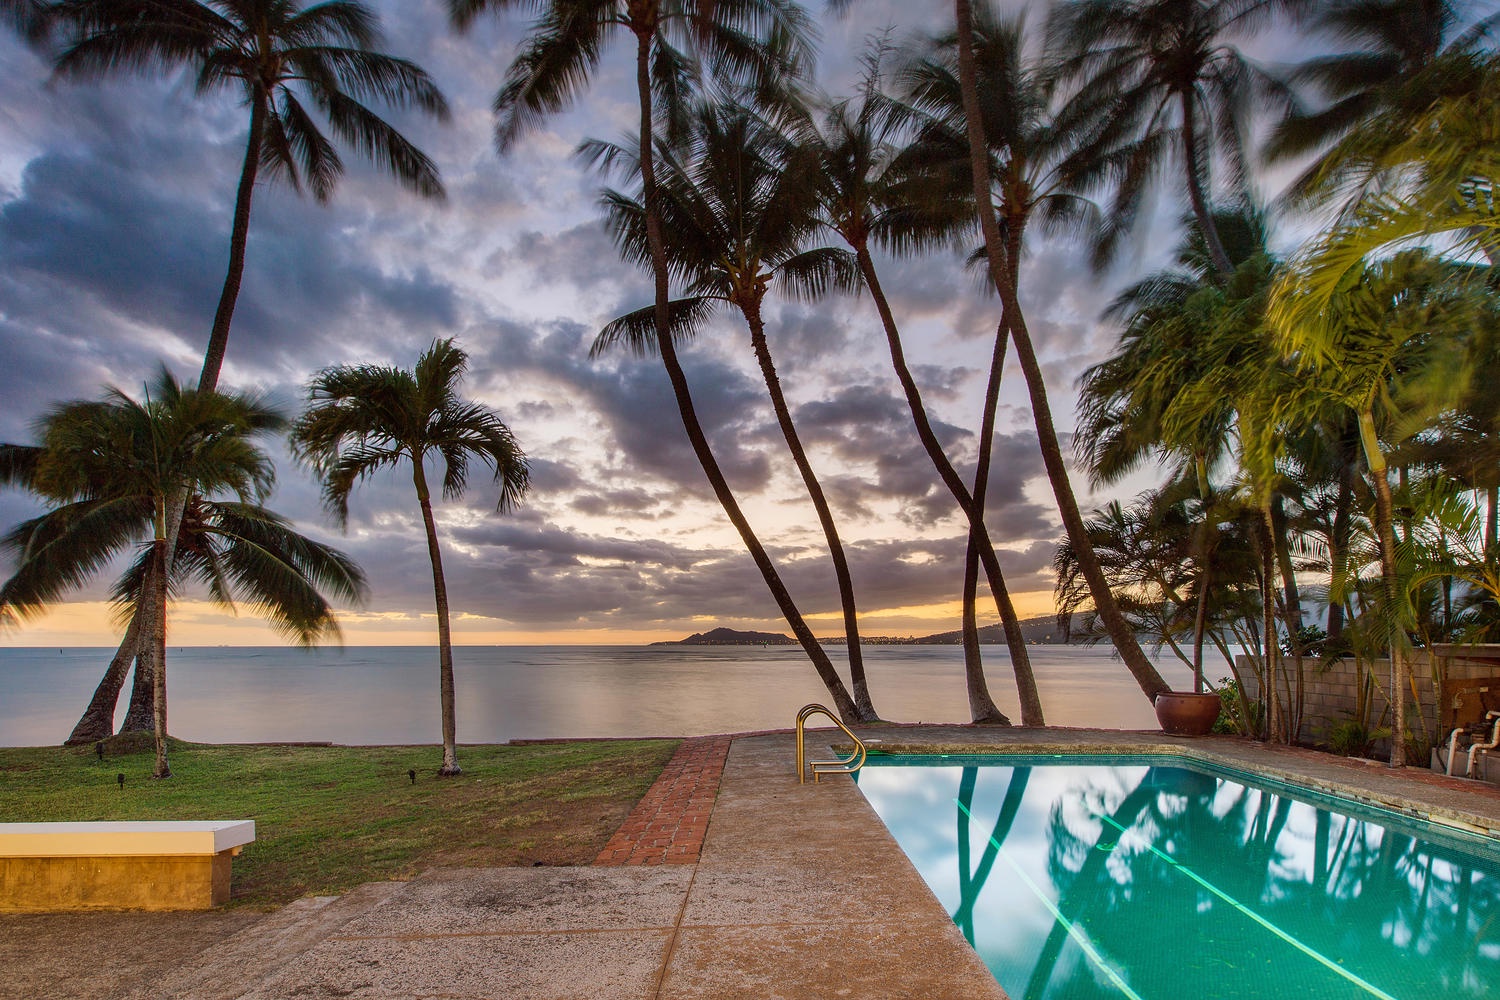 Honolulu Vacation Rentals, Hale Kai - Welcome to Hale Kai! Where the ocean waves calm your soul.